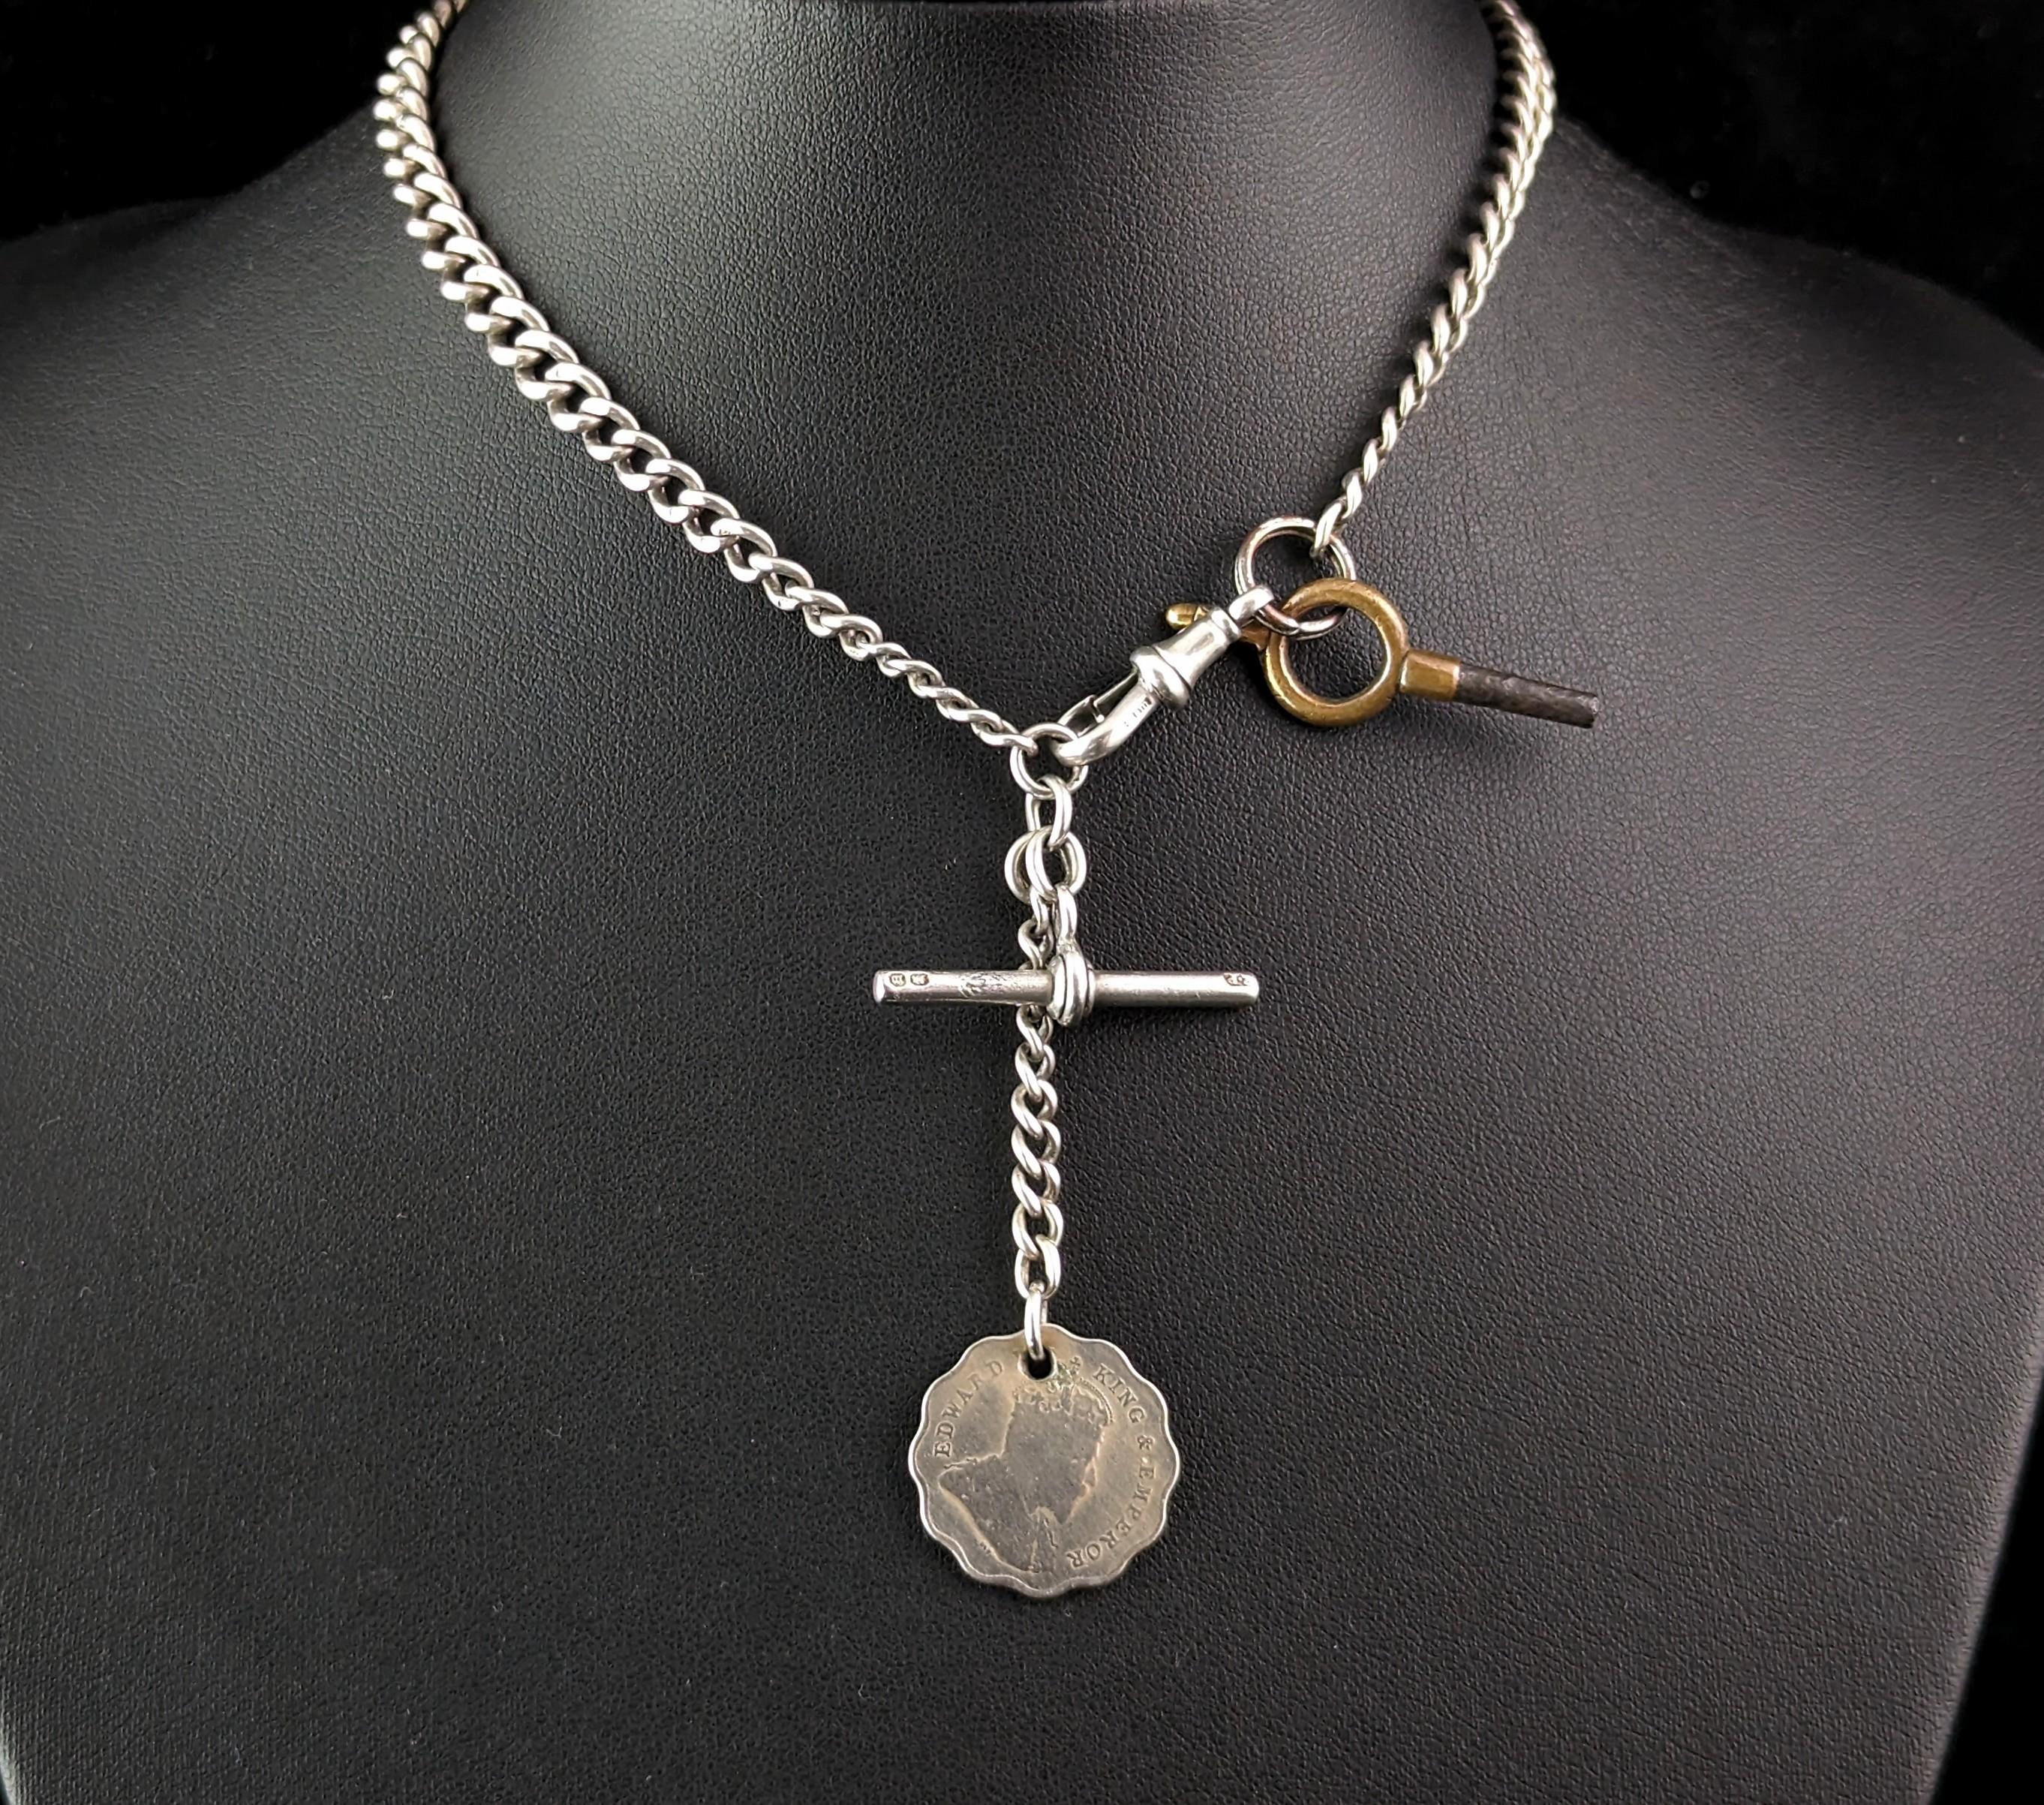 An attractive antique, Edwardian era sterling silver Albert chain or watch chain.

Nice solid silver, graduated curb links with a dog clip fastener to one end with an Edwardian coin fob and pocket watch key attached.

The chain is made from sterling